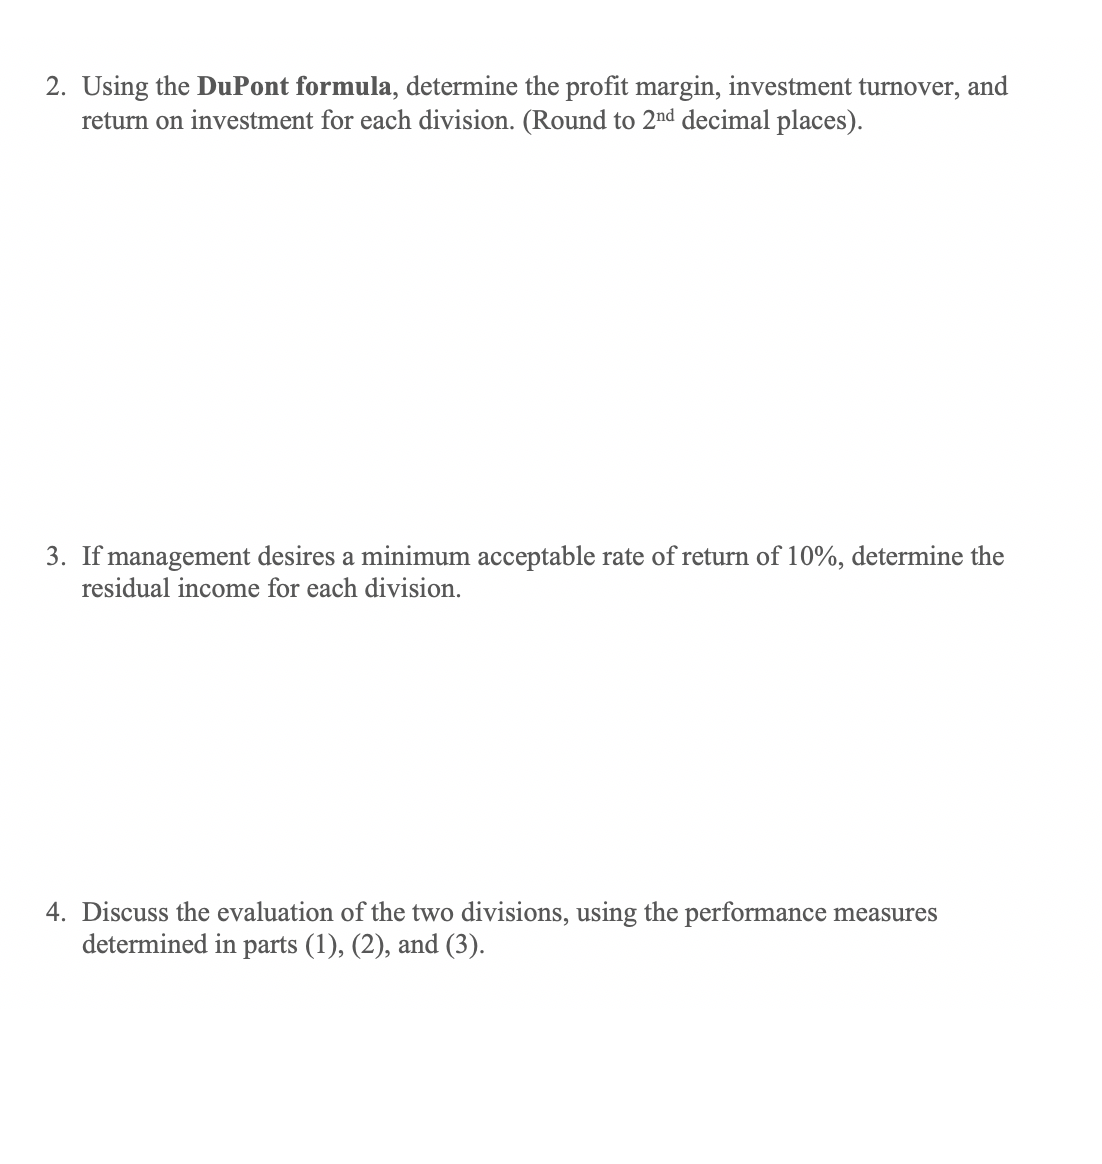 2. Using the DuPont formula, determine the profit margin, investment turnover, and
return on investment for each division. (Round to 2nd decimal places).
3. If management desires a minimum acceptable rate of return of 10%, determine the
residual income for each division.
4. Discuss the evaluation of the two divisions, using the performance measures
determined in parts (1), (2), and (3).
